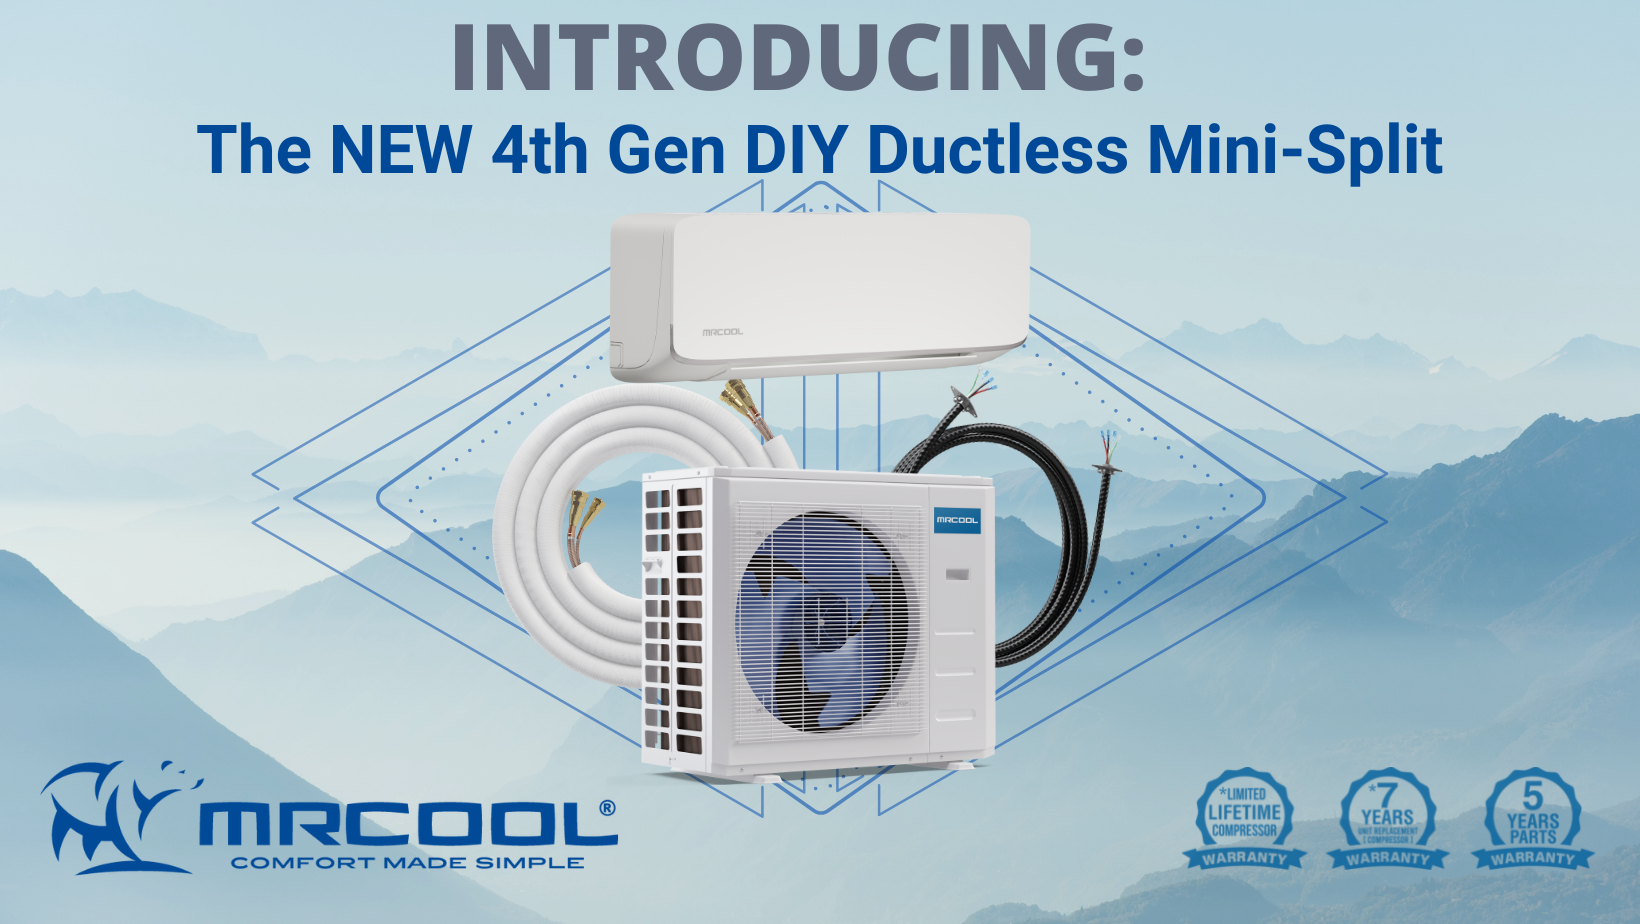 INTRODUCING: The NEW 4th Gen DIY Ductless Mini-Split